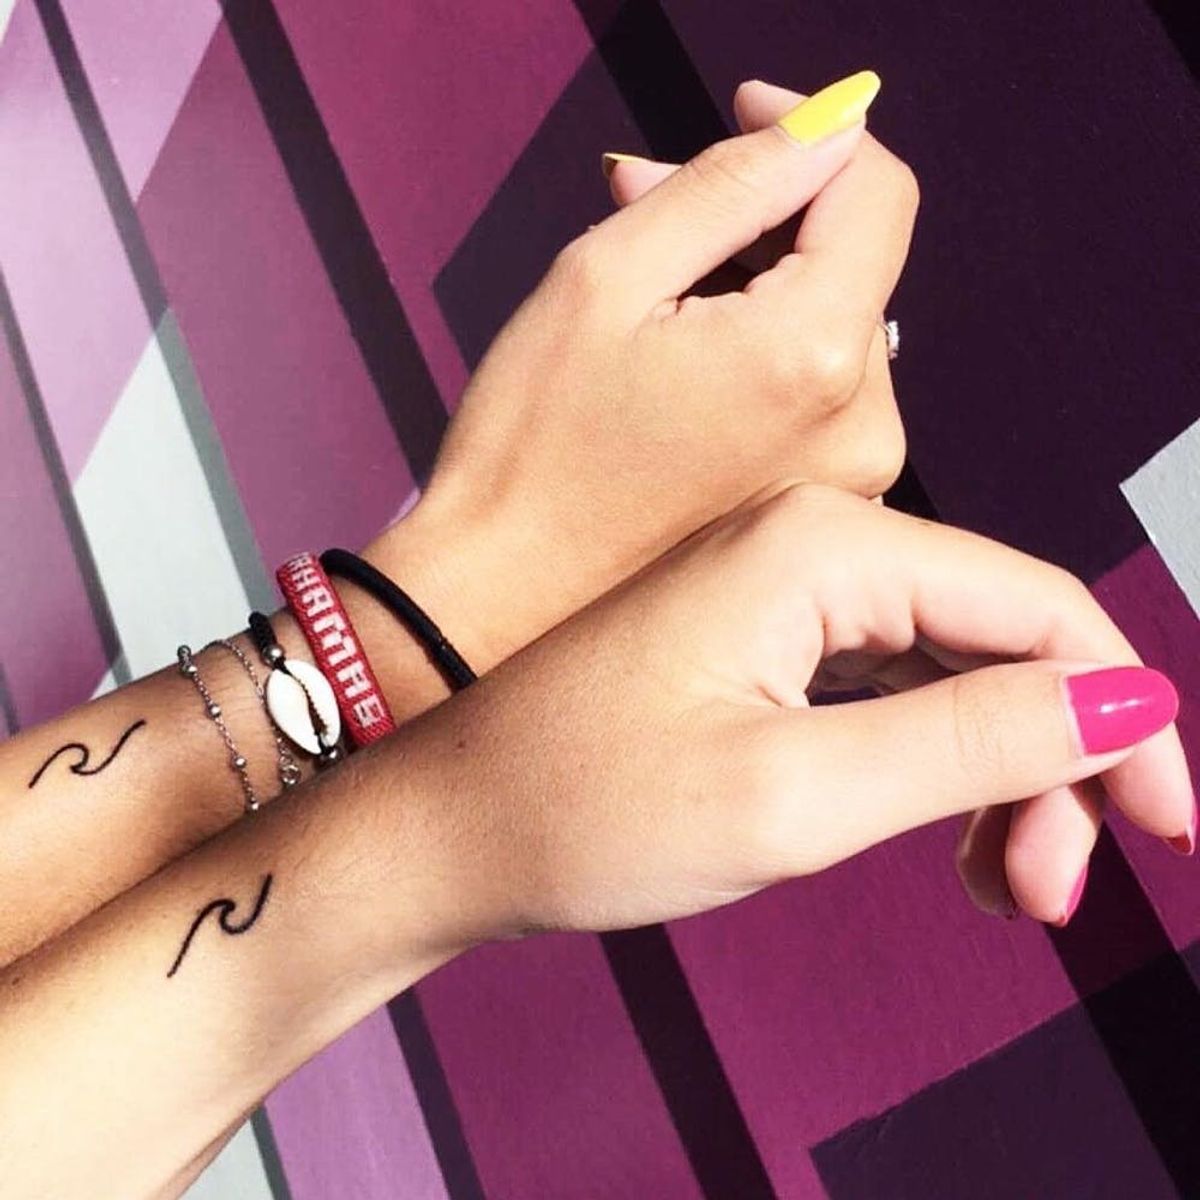 25 Sister Tattoo Ideas to Get With Your Other Half